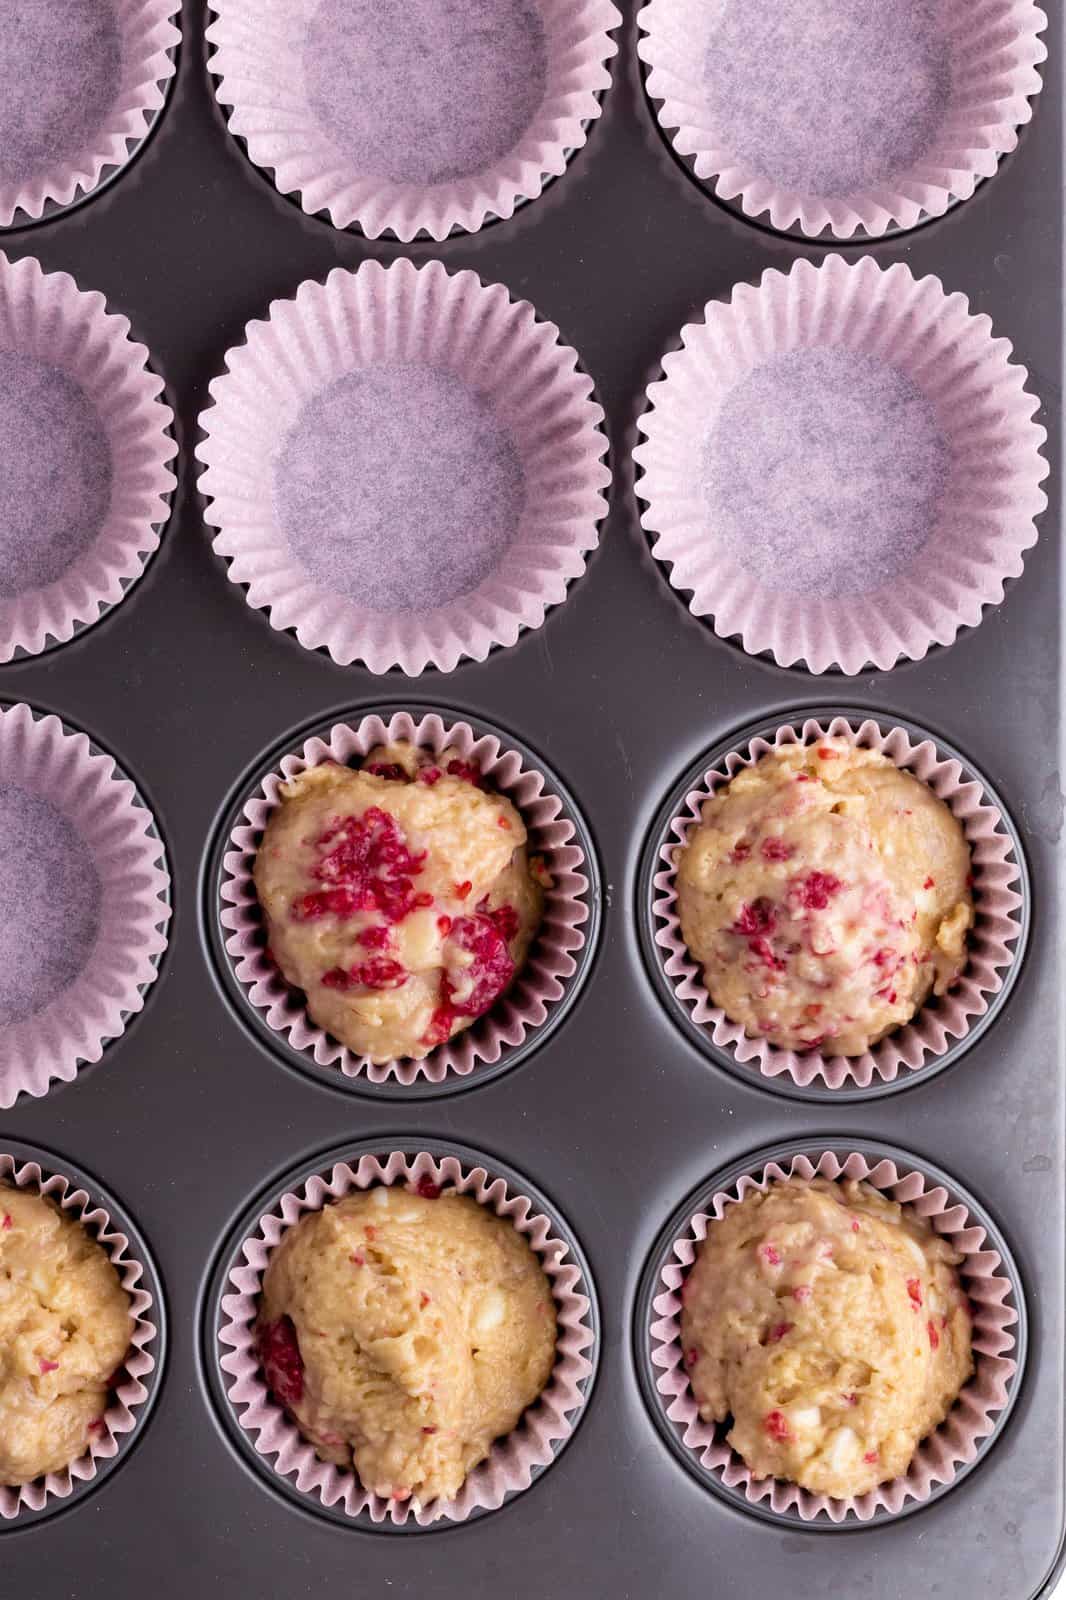 Muffin batter scooped into paper lined wells in muffin tin.